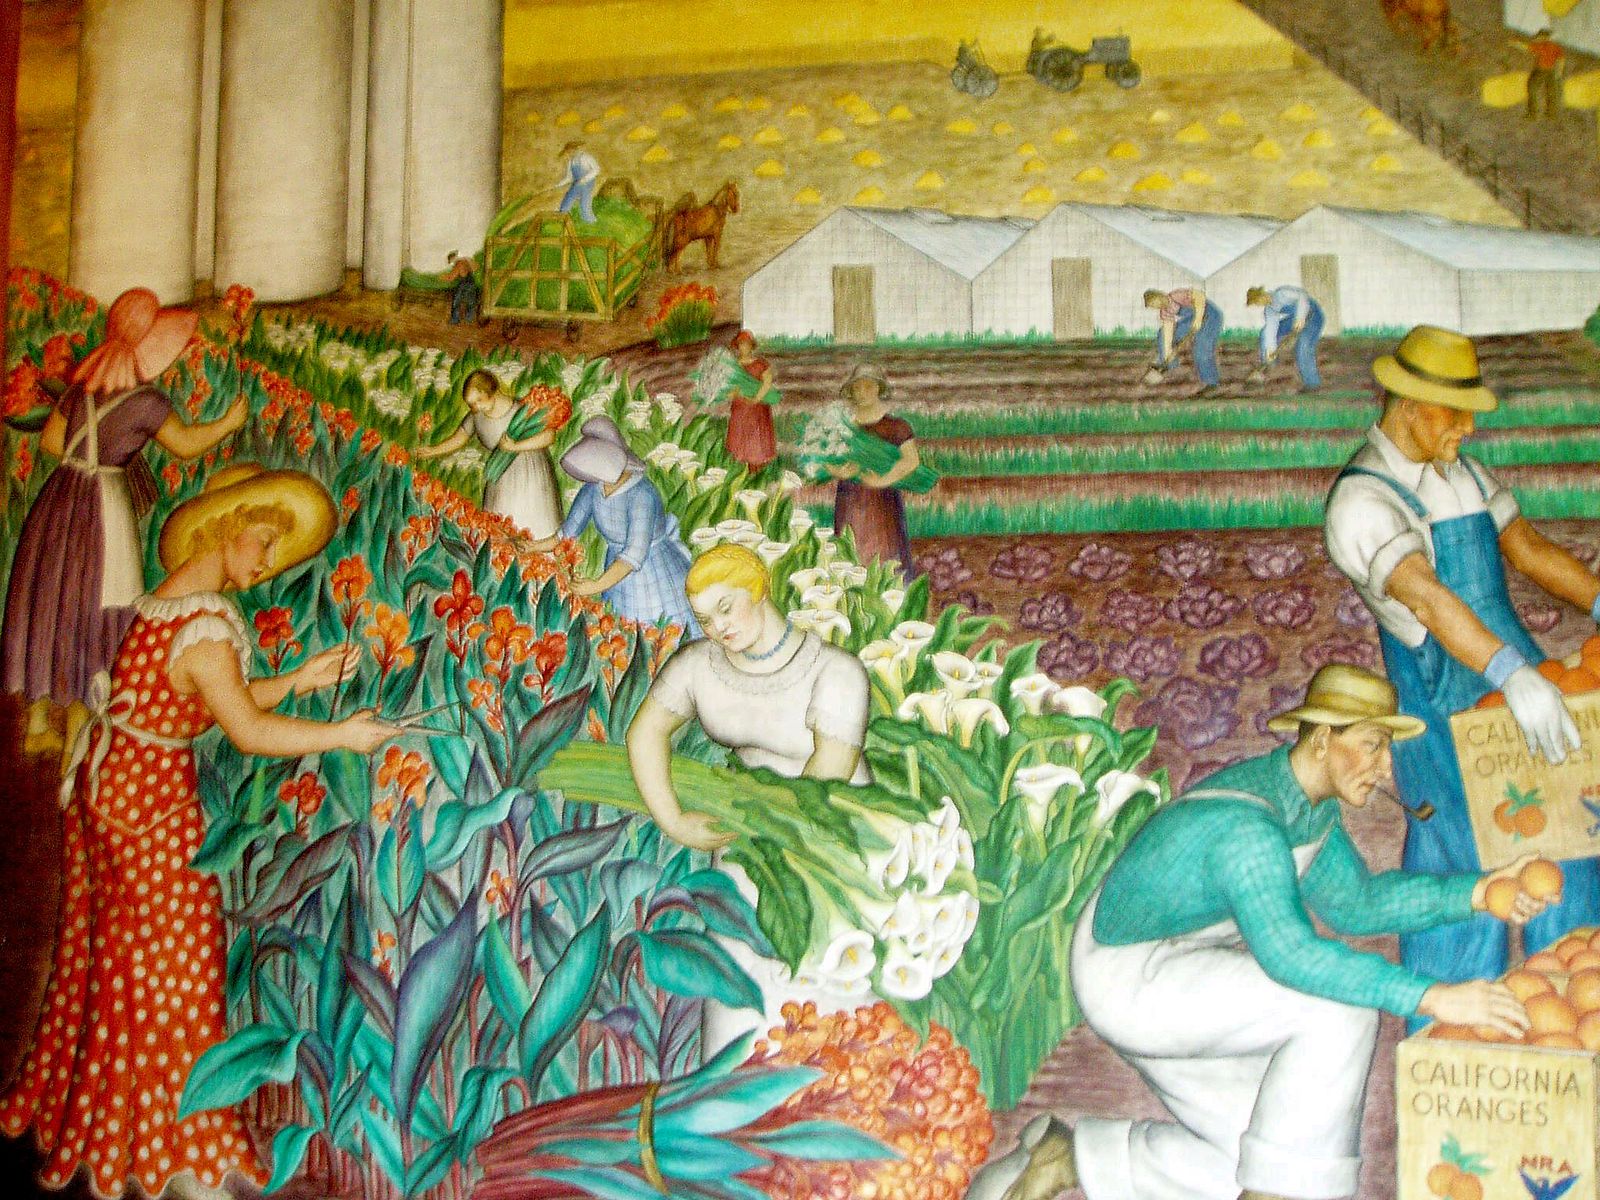 Mural of men and women working the flower crops in a field